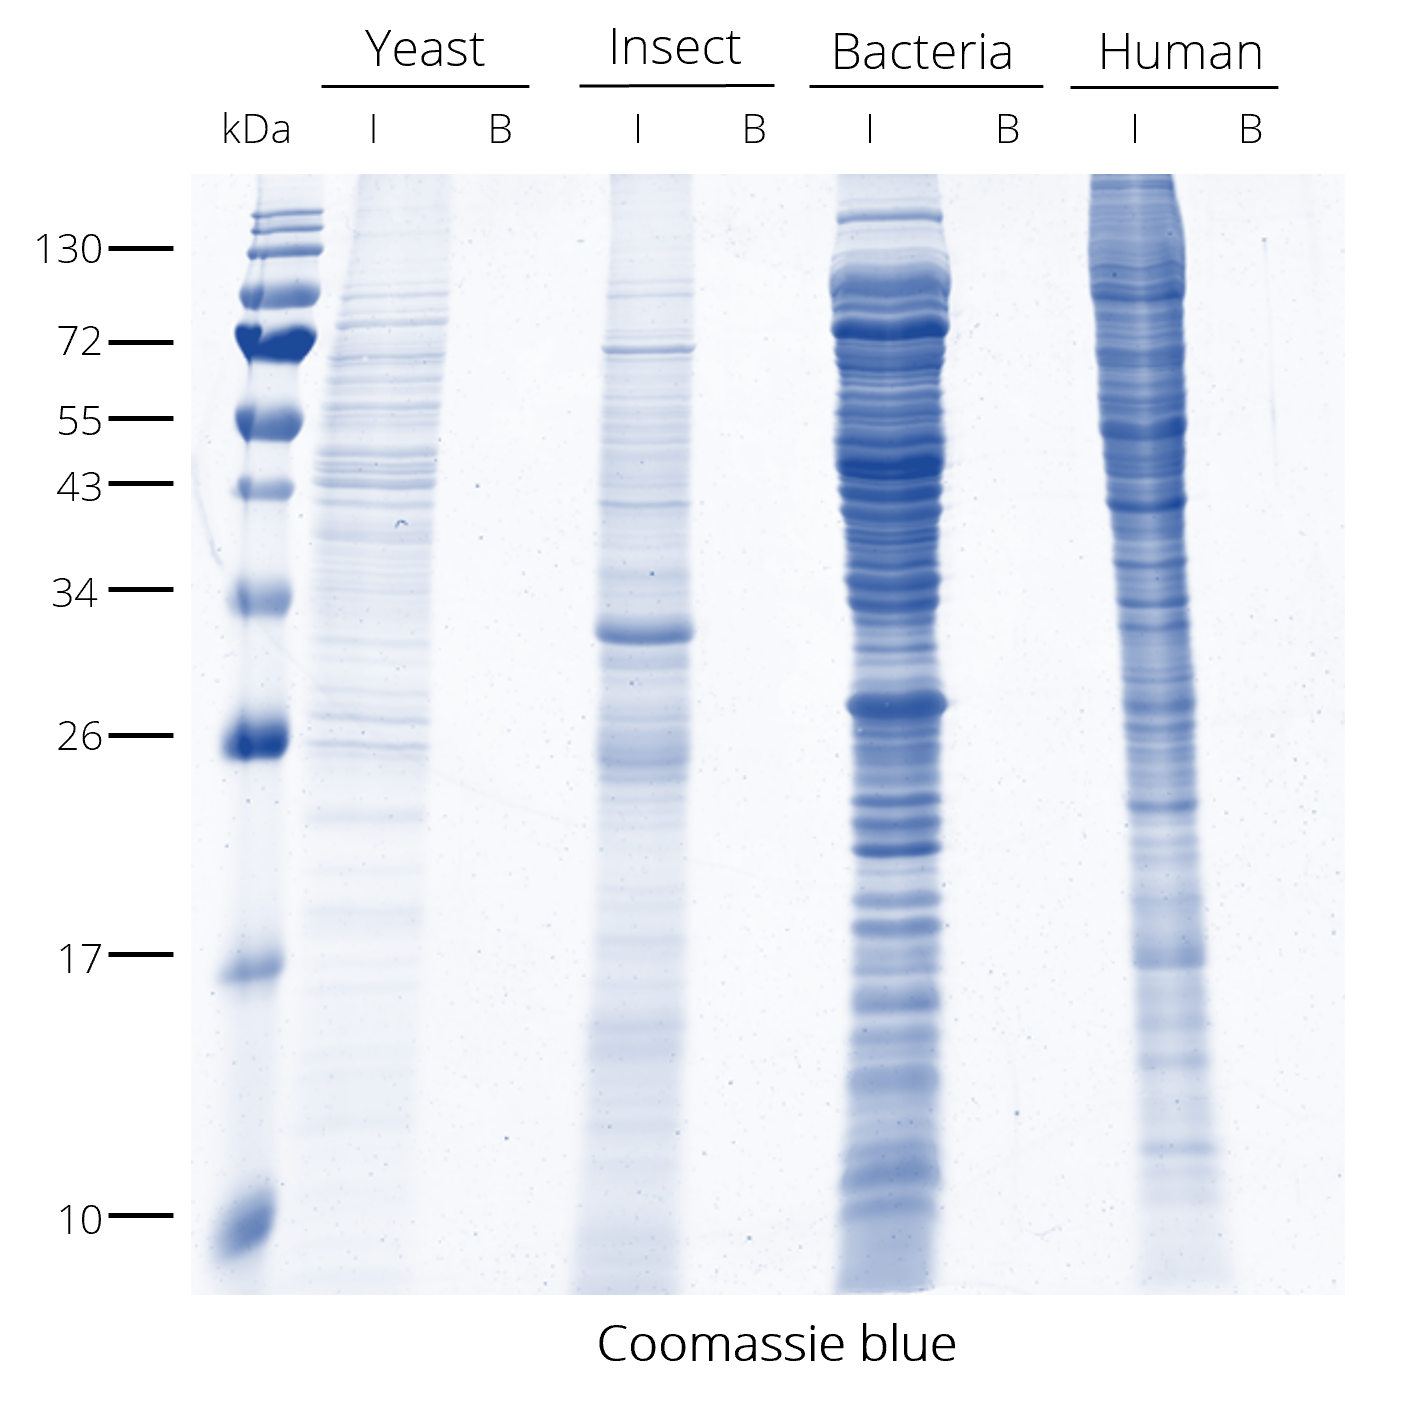 Very low background of V5-Trap® Magnetic Agarose: IP from different cell lysates without V5-tagged protein.